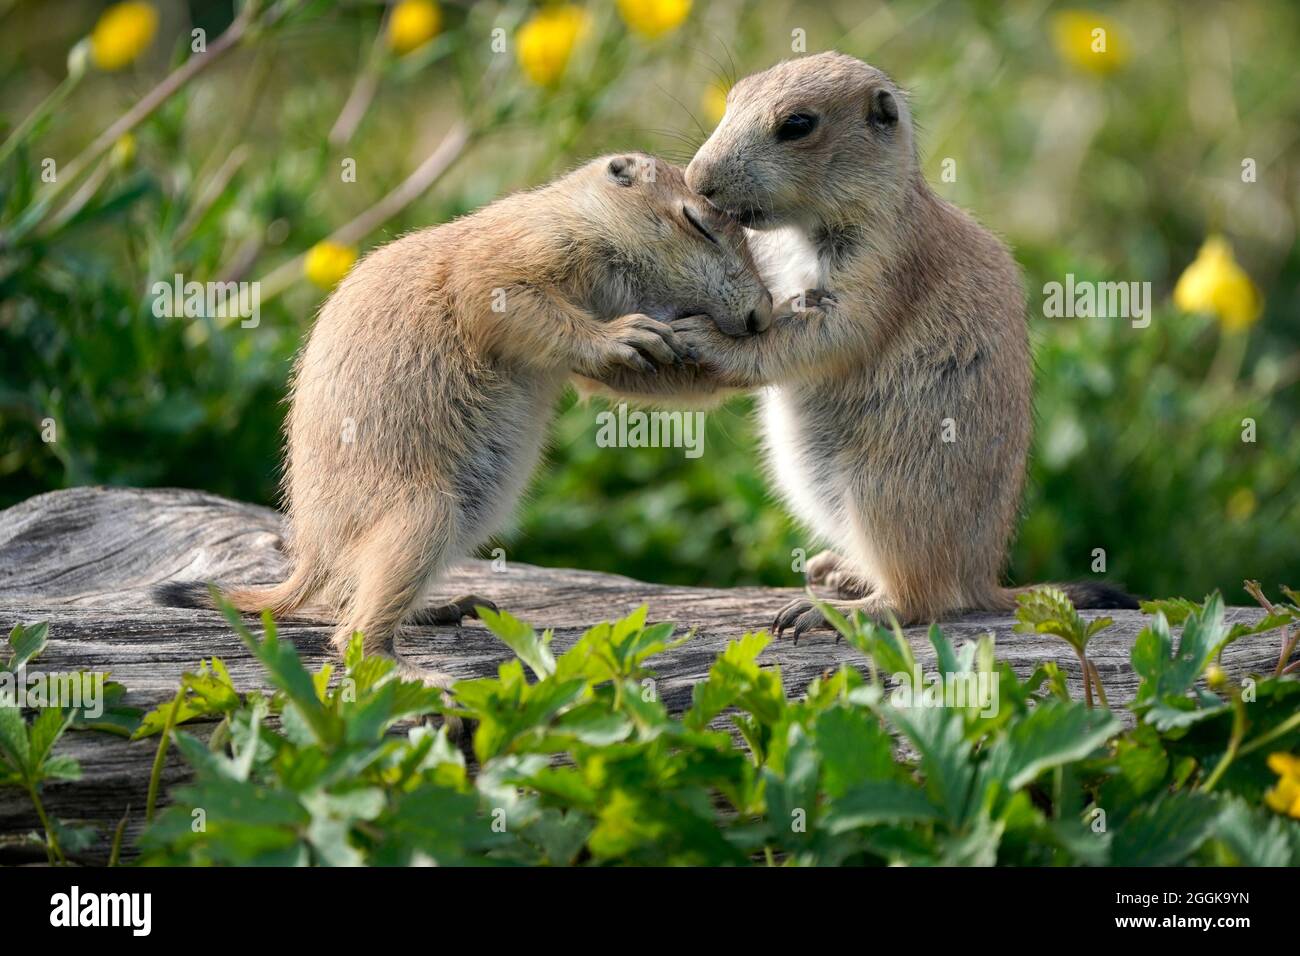 Black-tailed prairie dog (Cynomy ludovicianus) young animals playing, Germany Stock Photo